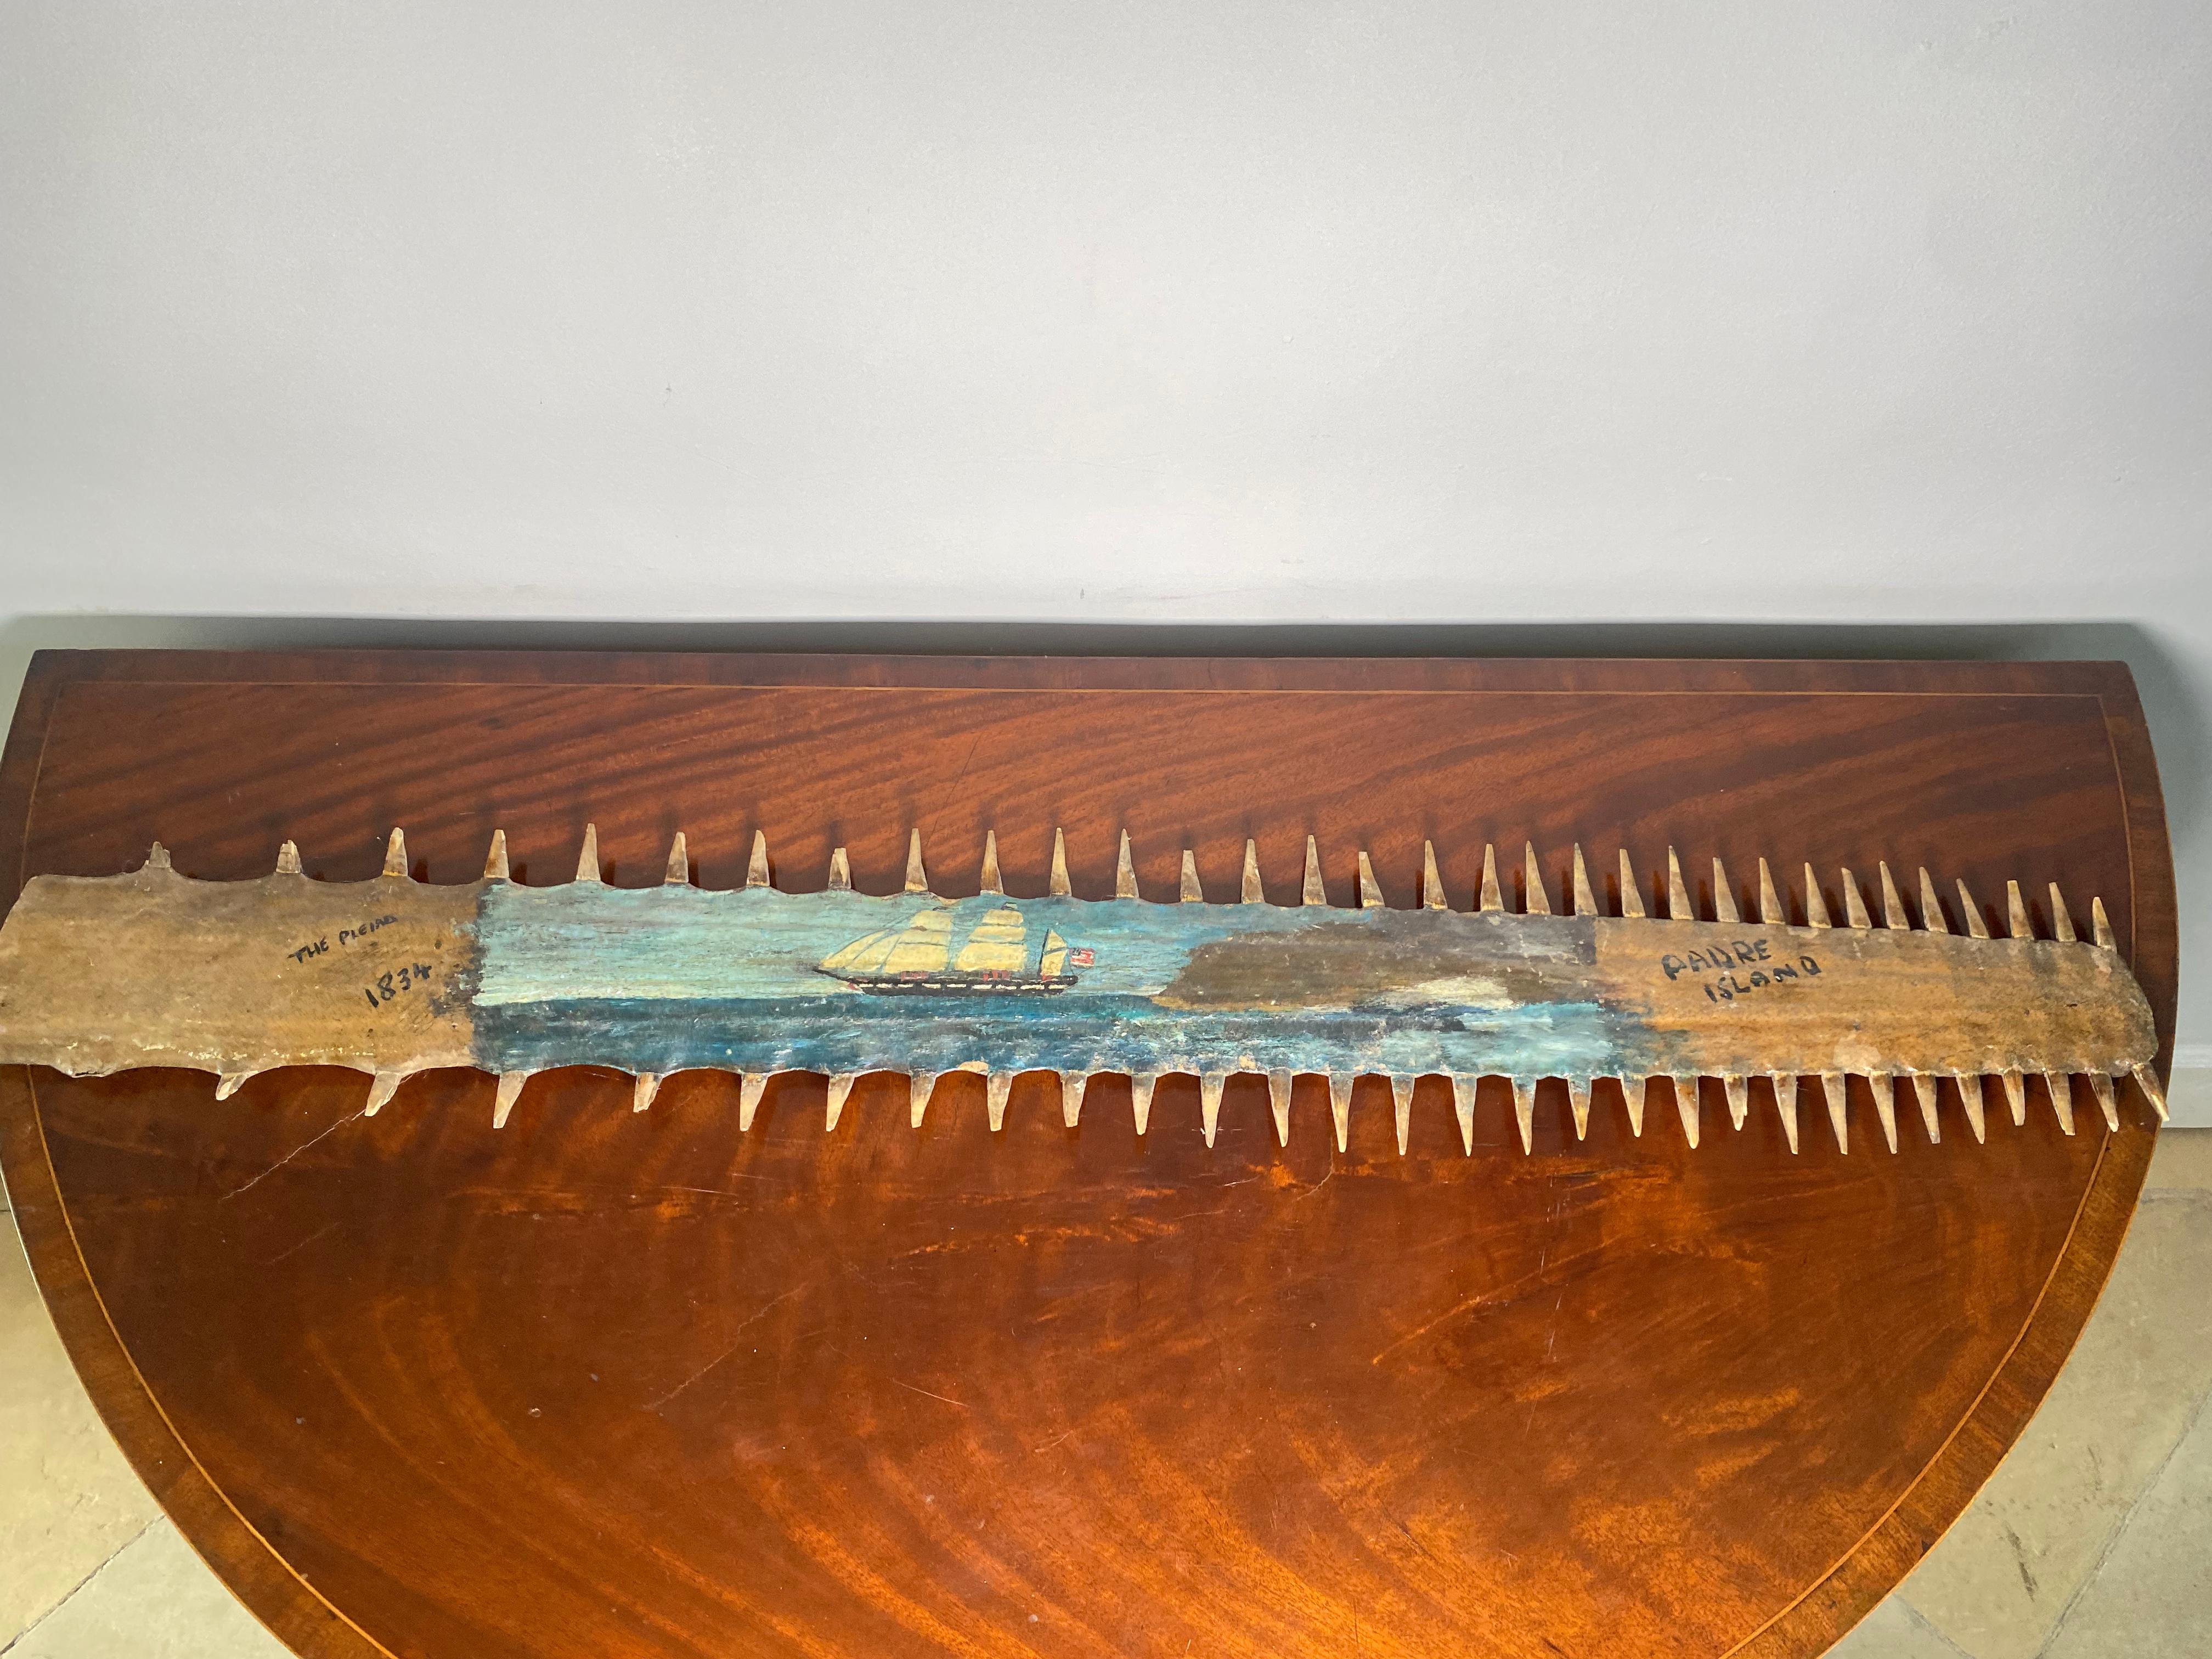 A fantastic and good size Sawfish Rostrum with folk art painting of the ship 'The Pleiad' at Padre Island Texas. dated 1834.